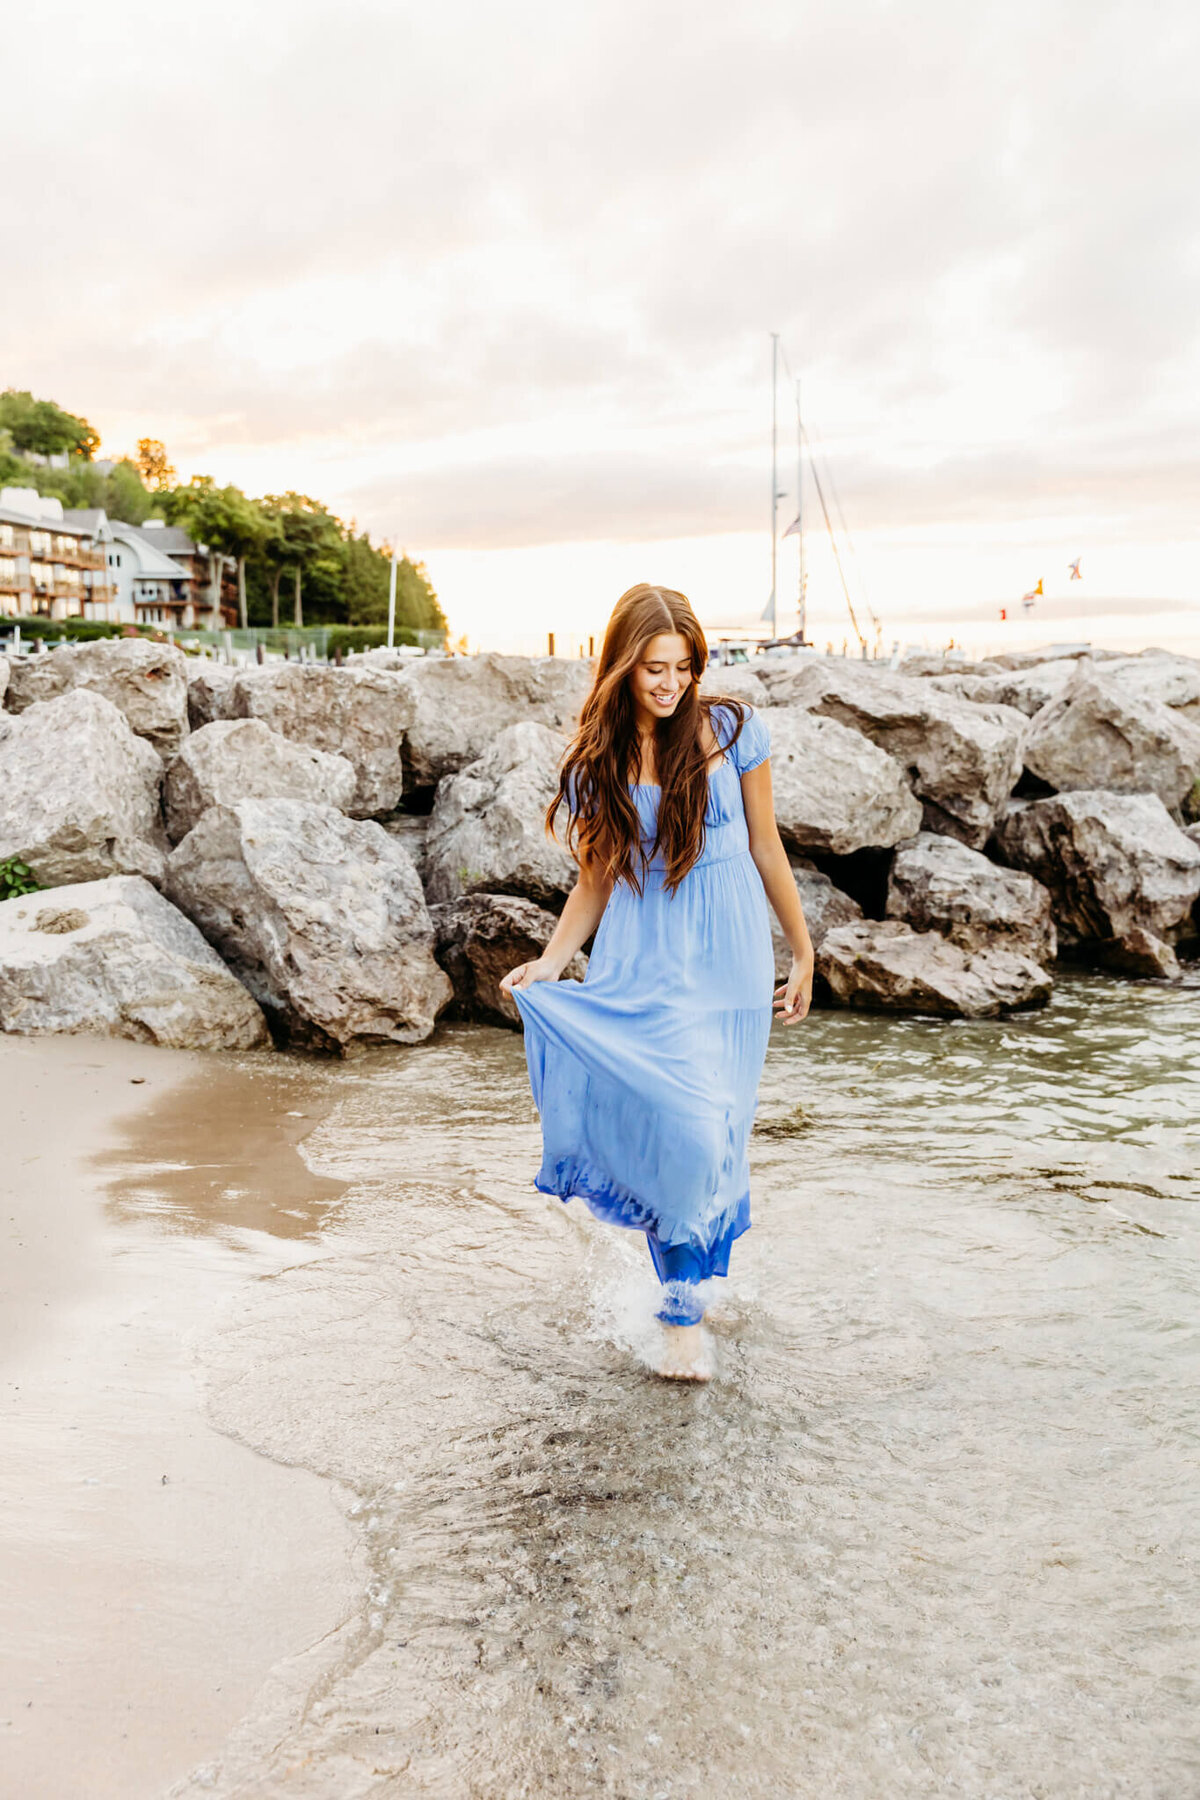 young lady holding her dress as she plays in the water for her senior photos